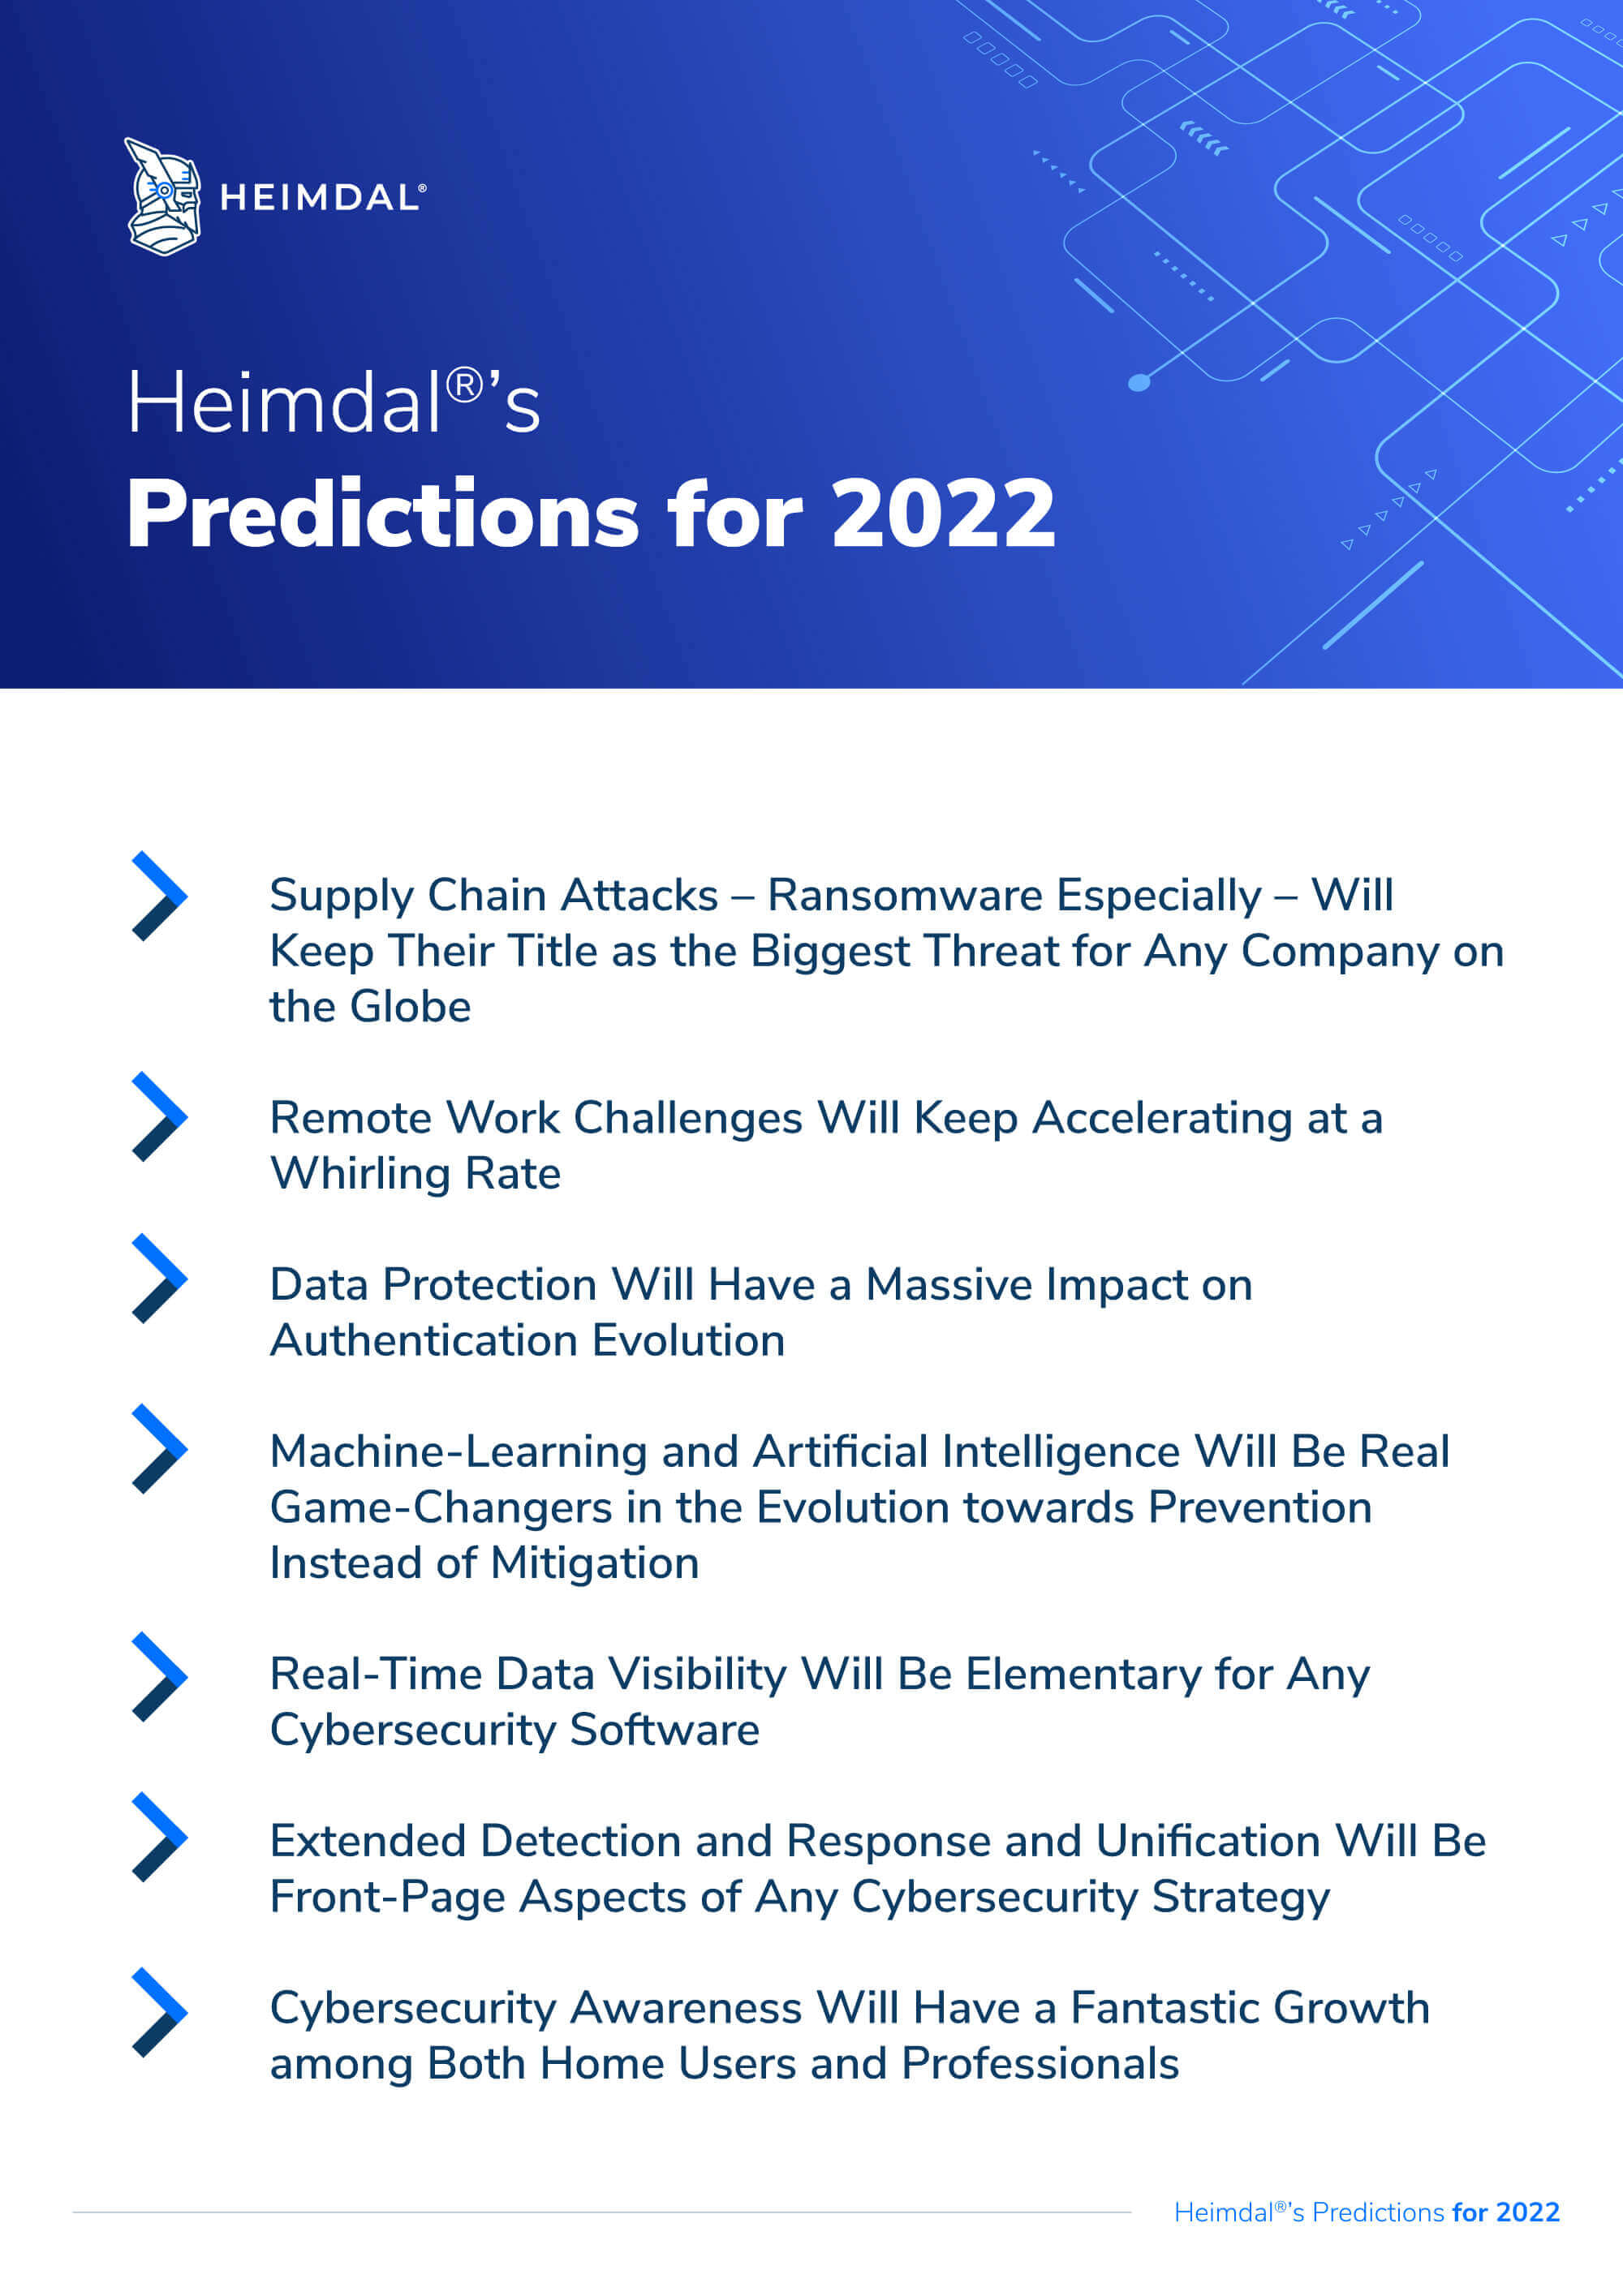 Cybersecurity Trends - Heimdal®’s Predictions for 2022